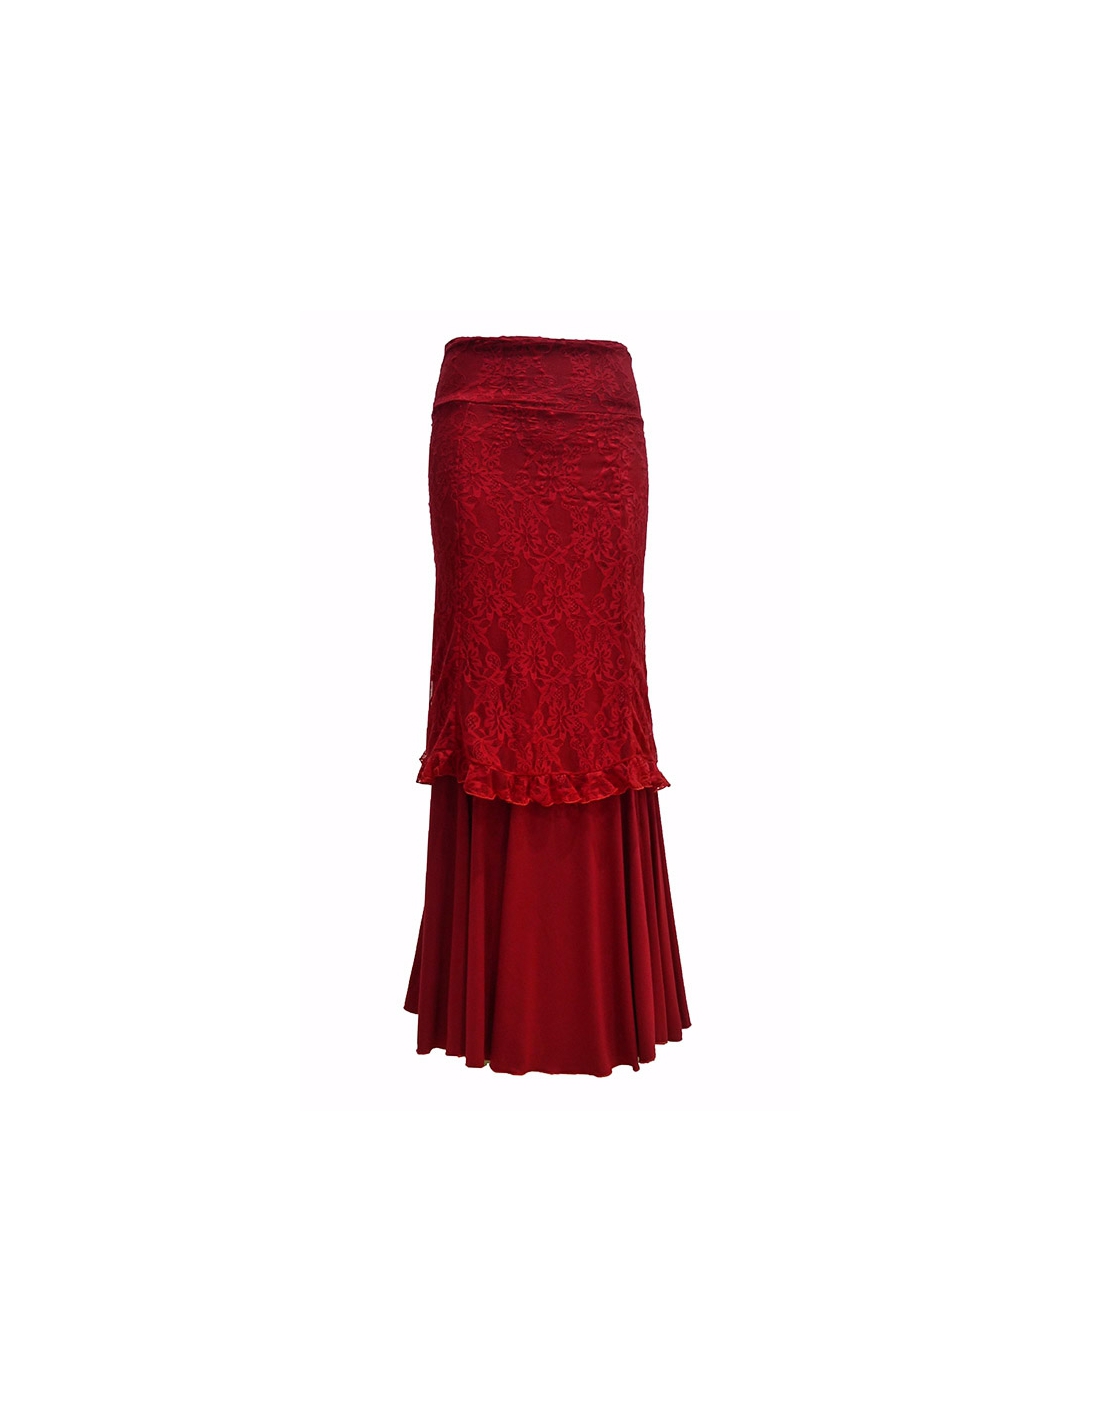 DOUBLE LACE SKIRT, 'RIOJA' RED COLOR